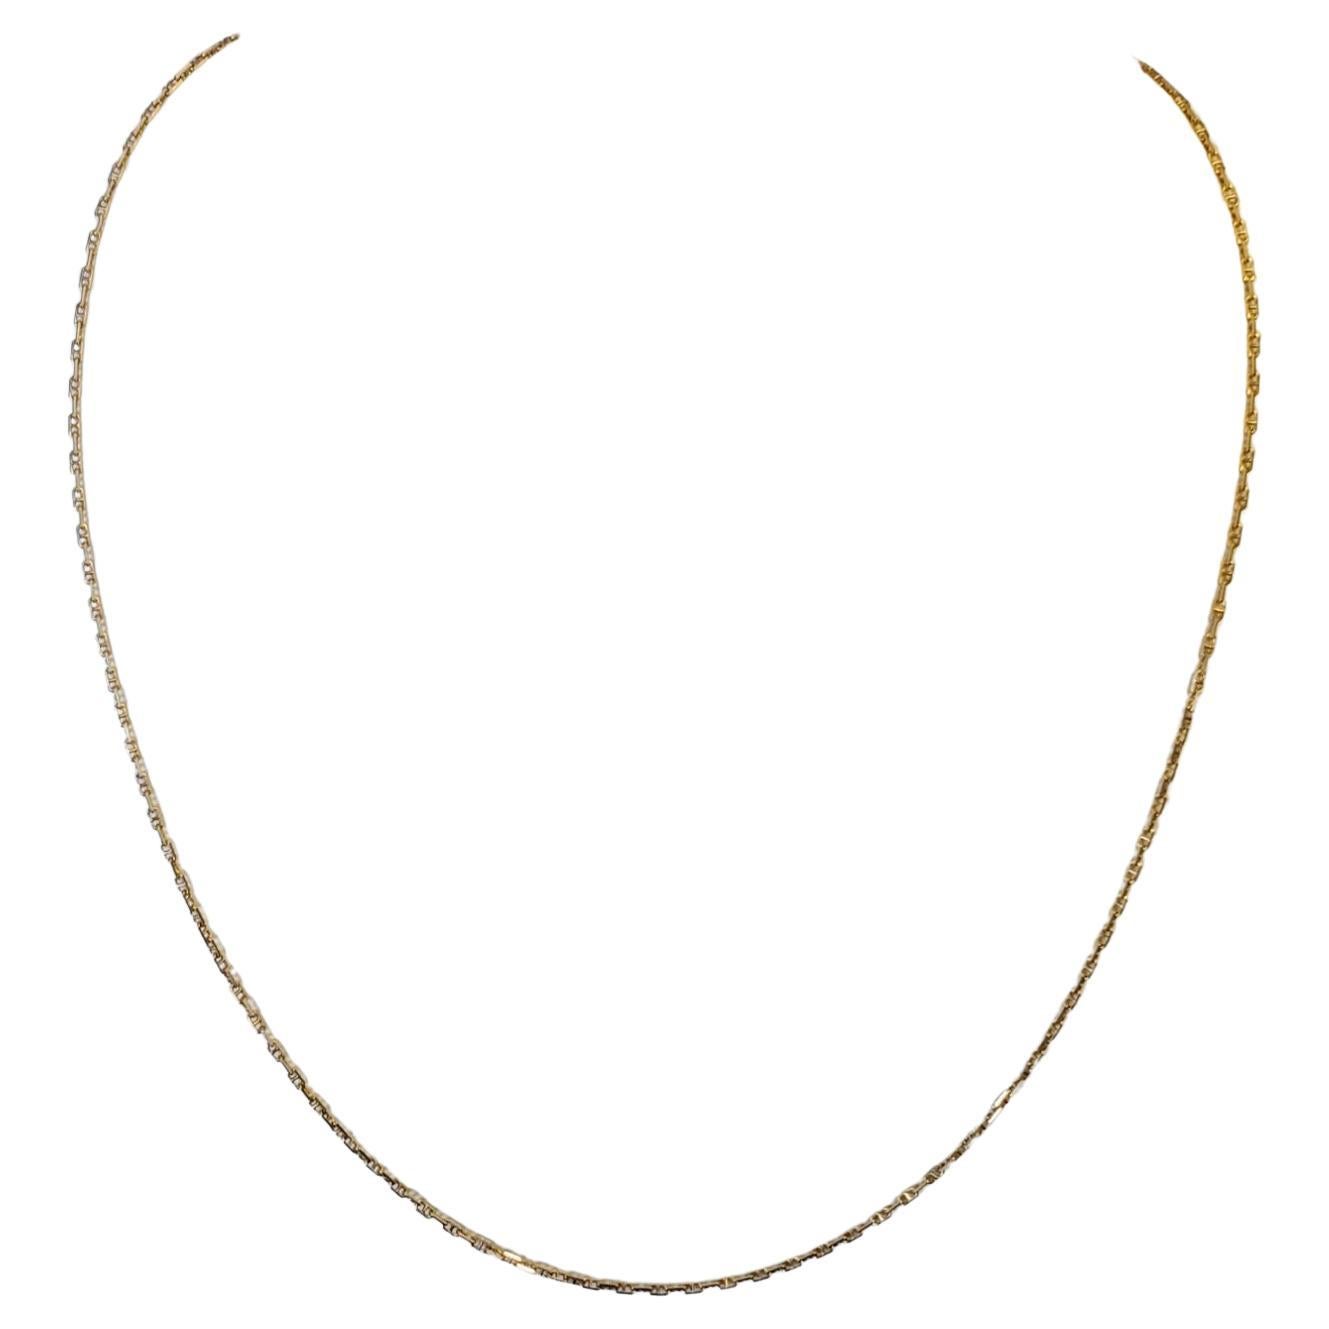 Vintage Italian 14k Chain Yellow Gold Stamped Link Necklace Minimalistic For Sale